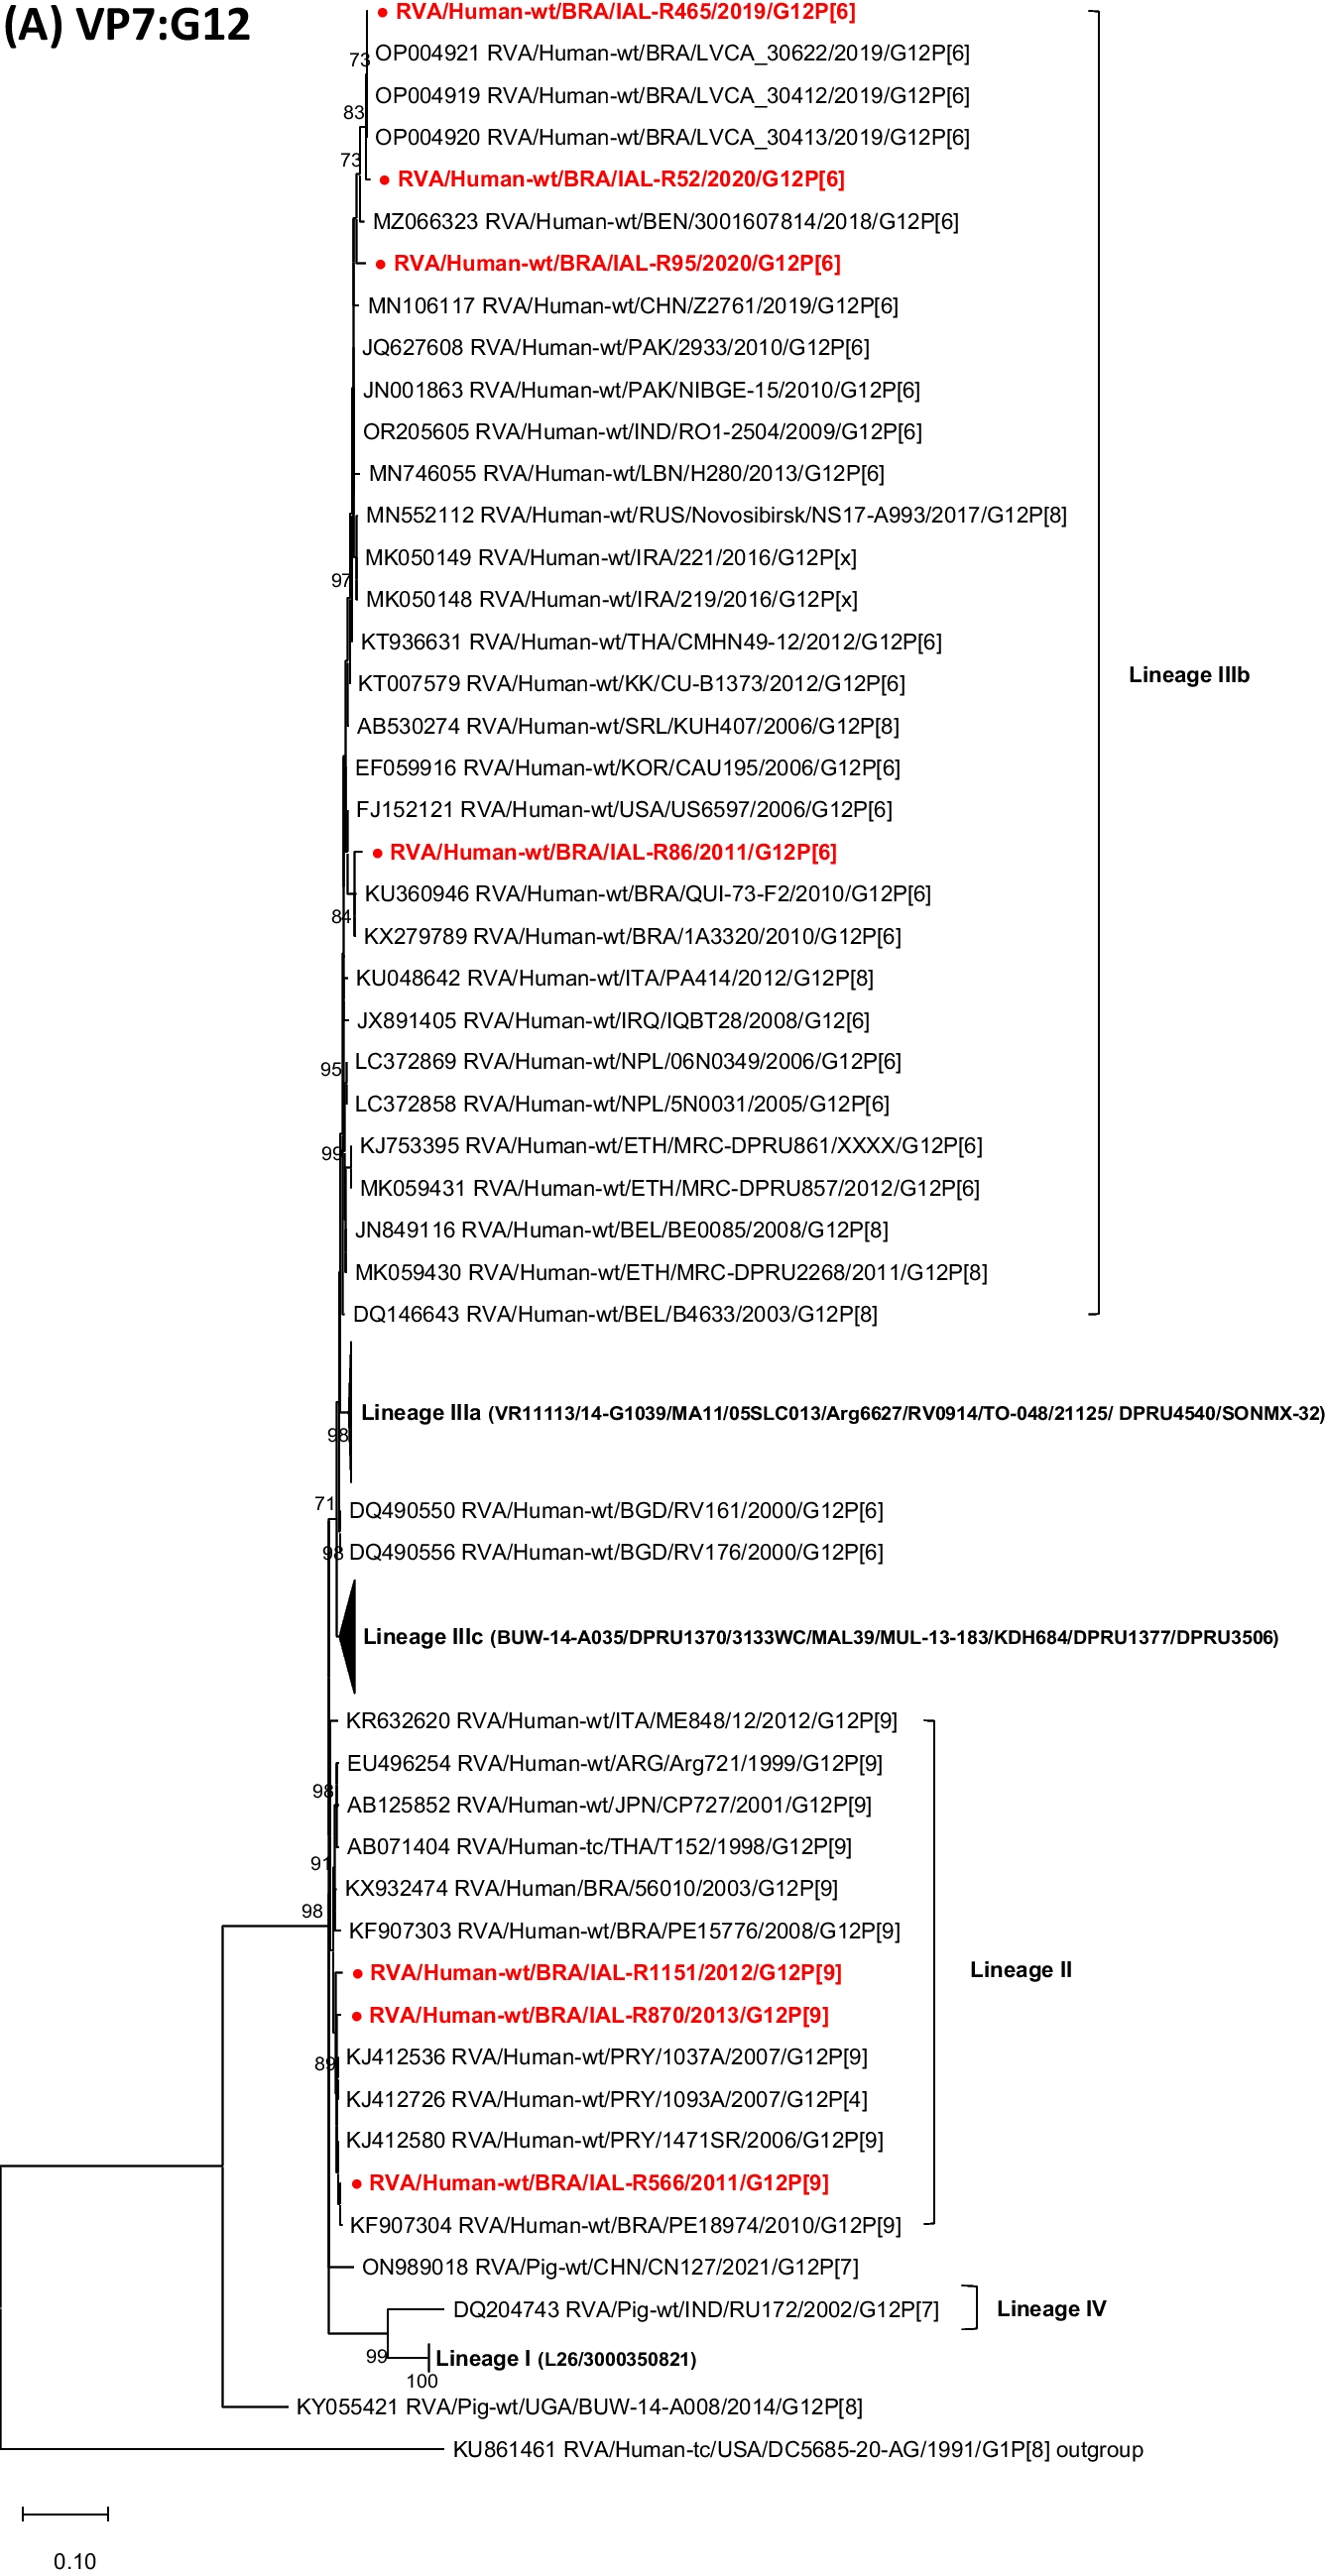 Genetic diversity and evolution of G12P[6] DS-1-like and G12P[9] AU-1-like Rotavirus strains in Brazil